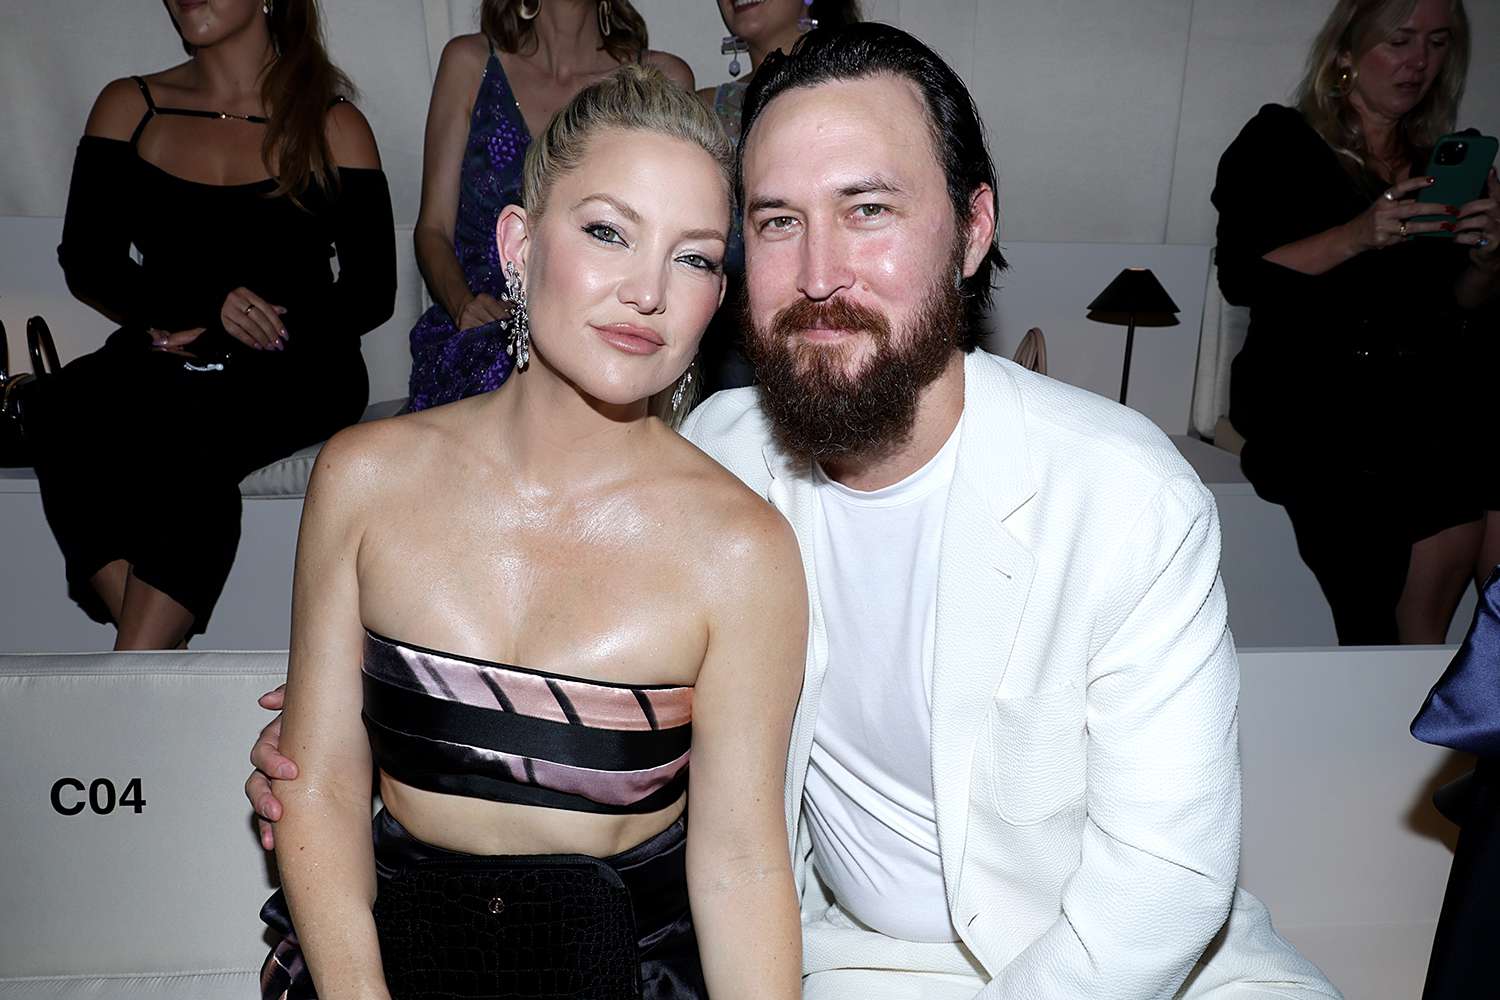 Kate Hudson Says She's Getting Married 'Soon' — But Planning a Wedding Is 'Such a Bummer'